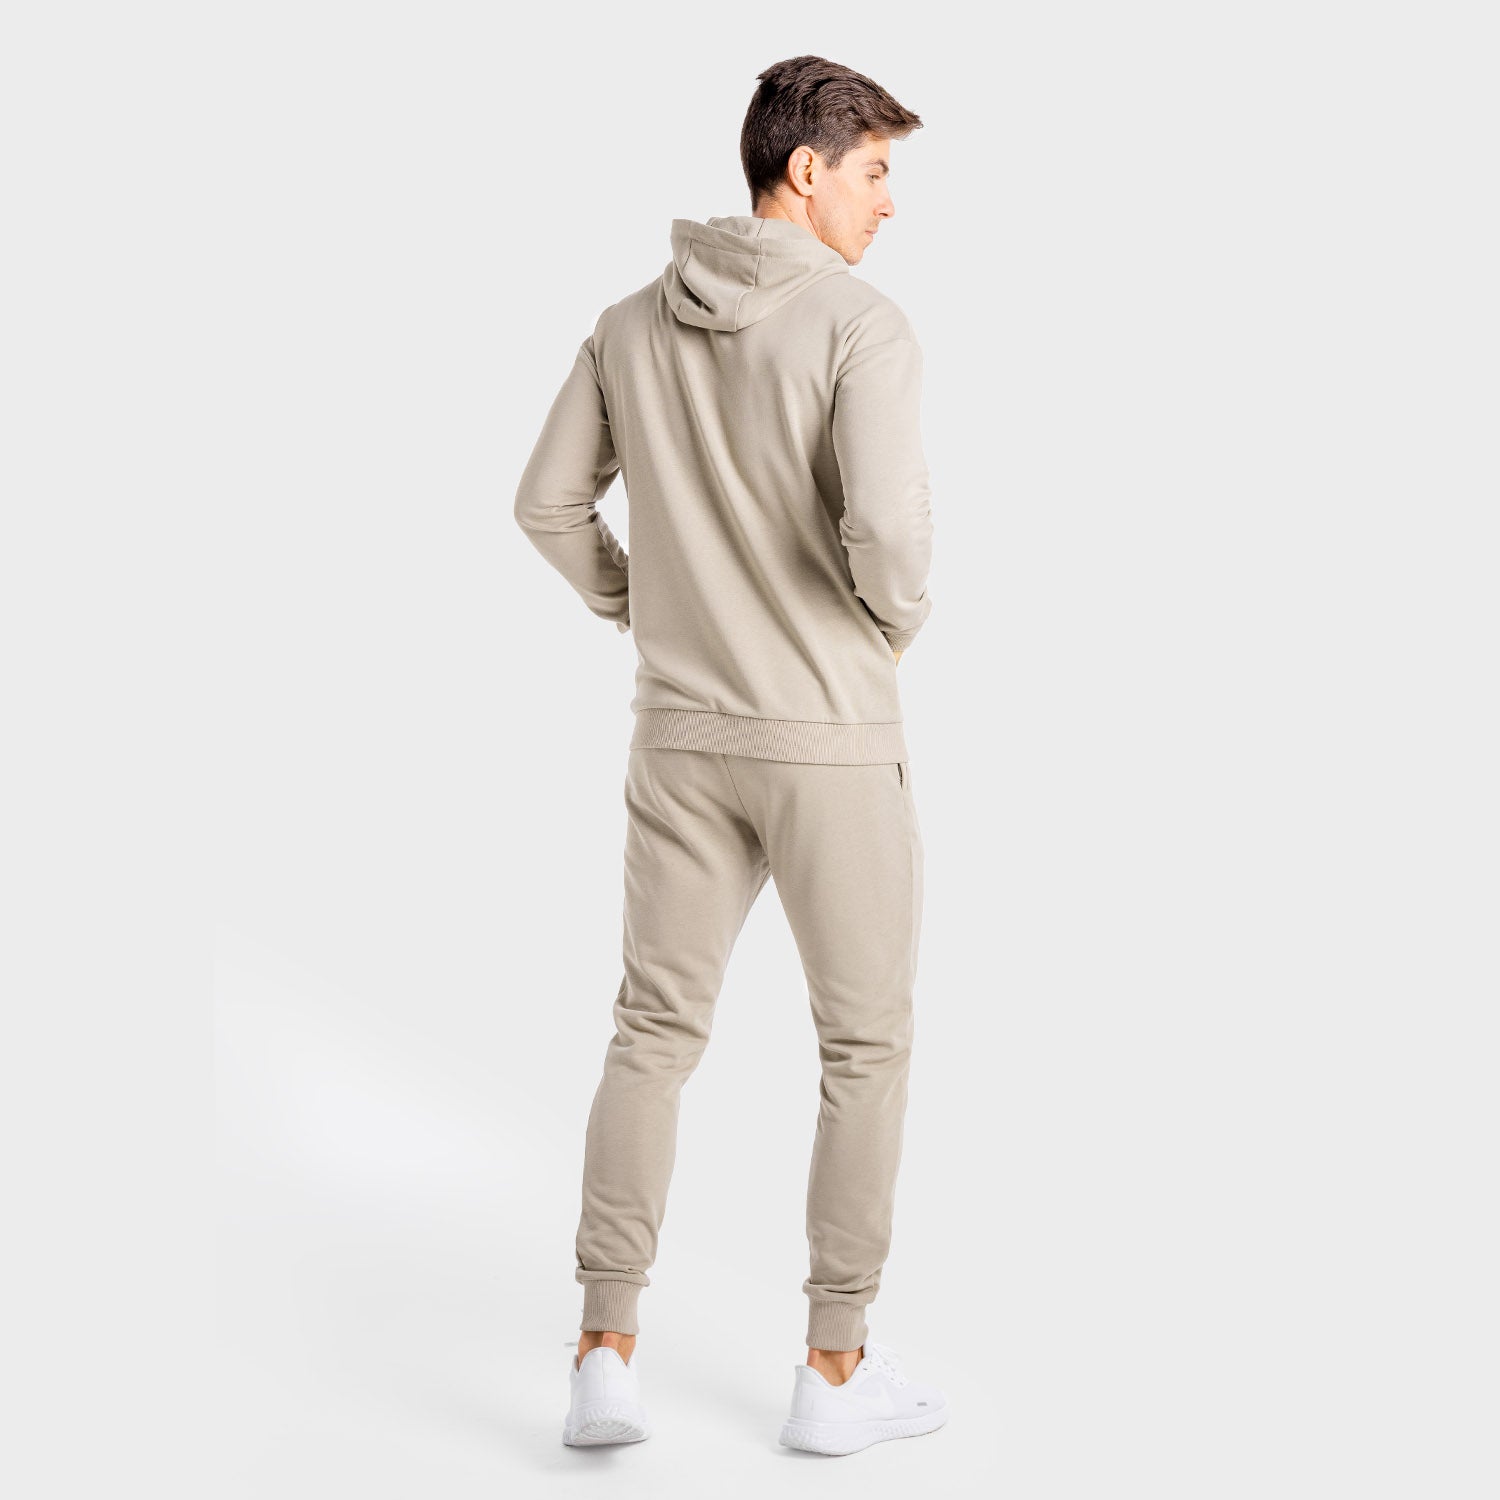 squatwolf-workout-hoodies-for-men-core-zip-up-taupe-gym-wear